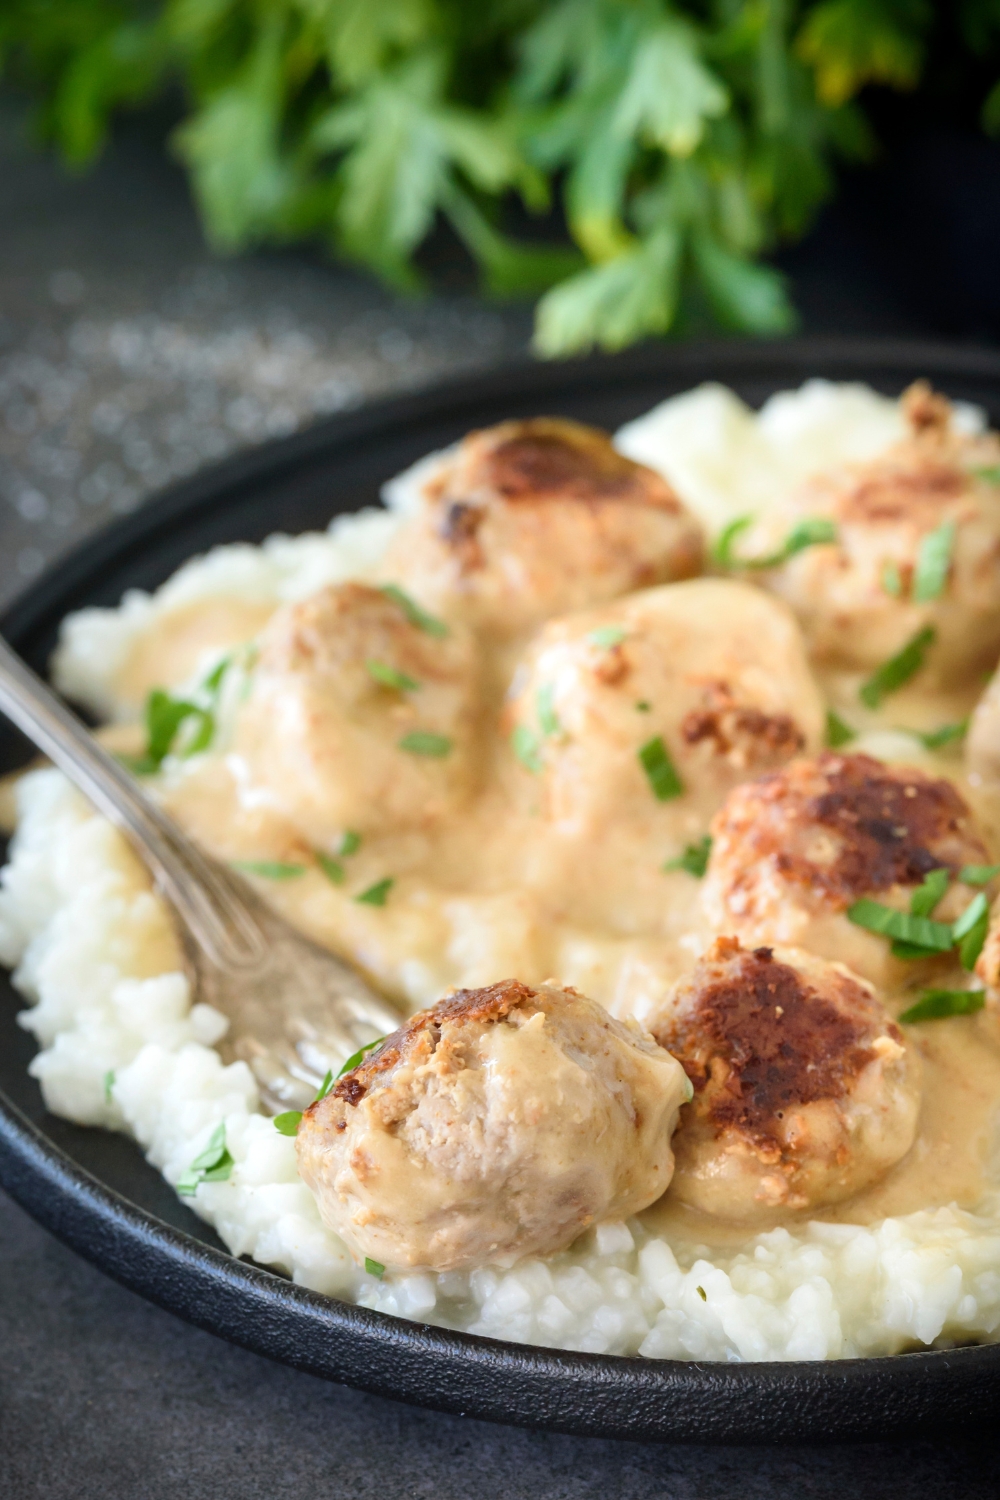 A plate of meatballs covered in fresh herbs and creamy gravy on a bed of rice. There is a fork on the plate.